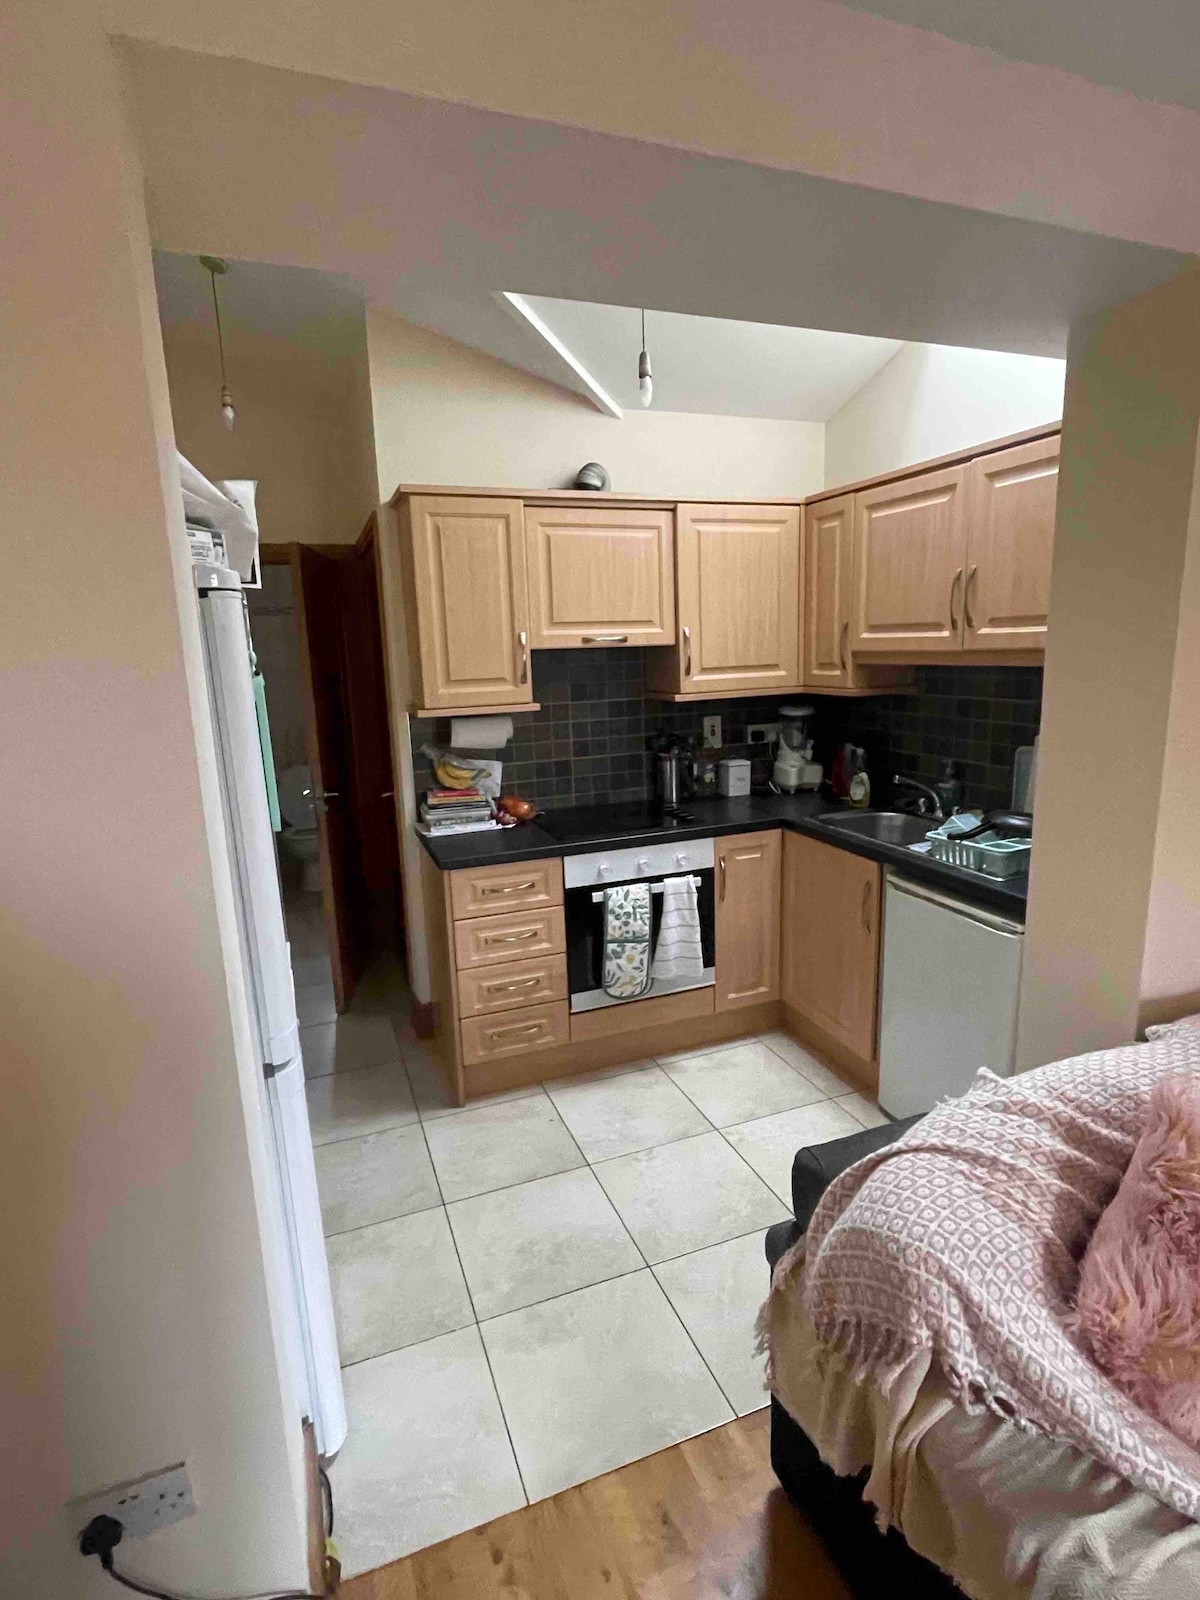 1 bedroom house In town centre